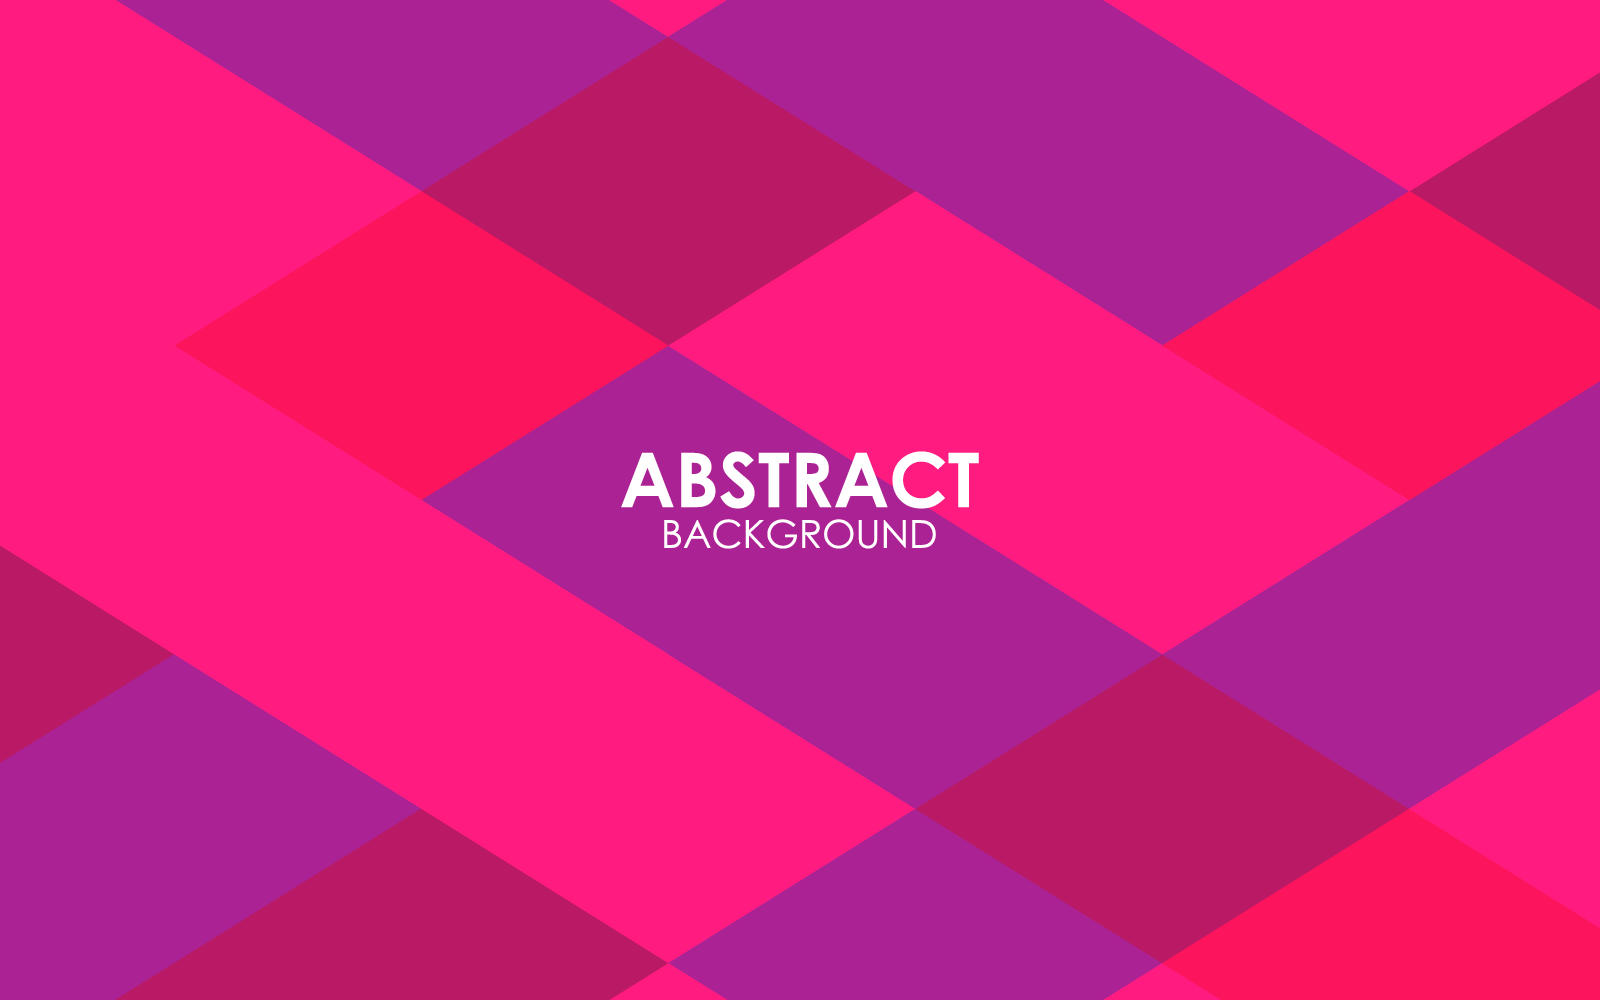 Colorful Abstract background vector flat design